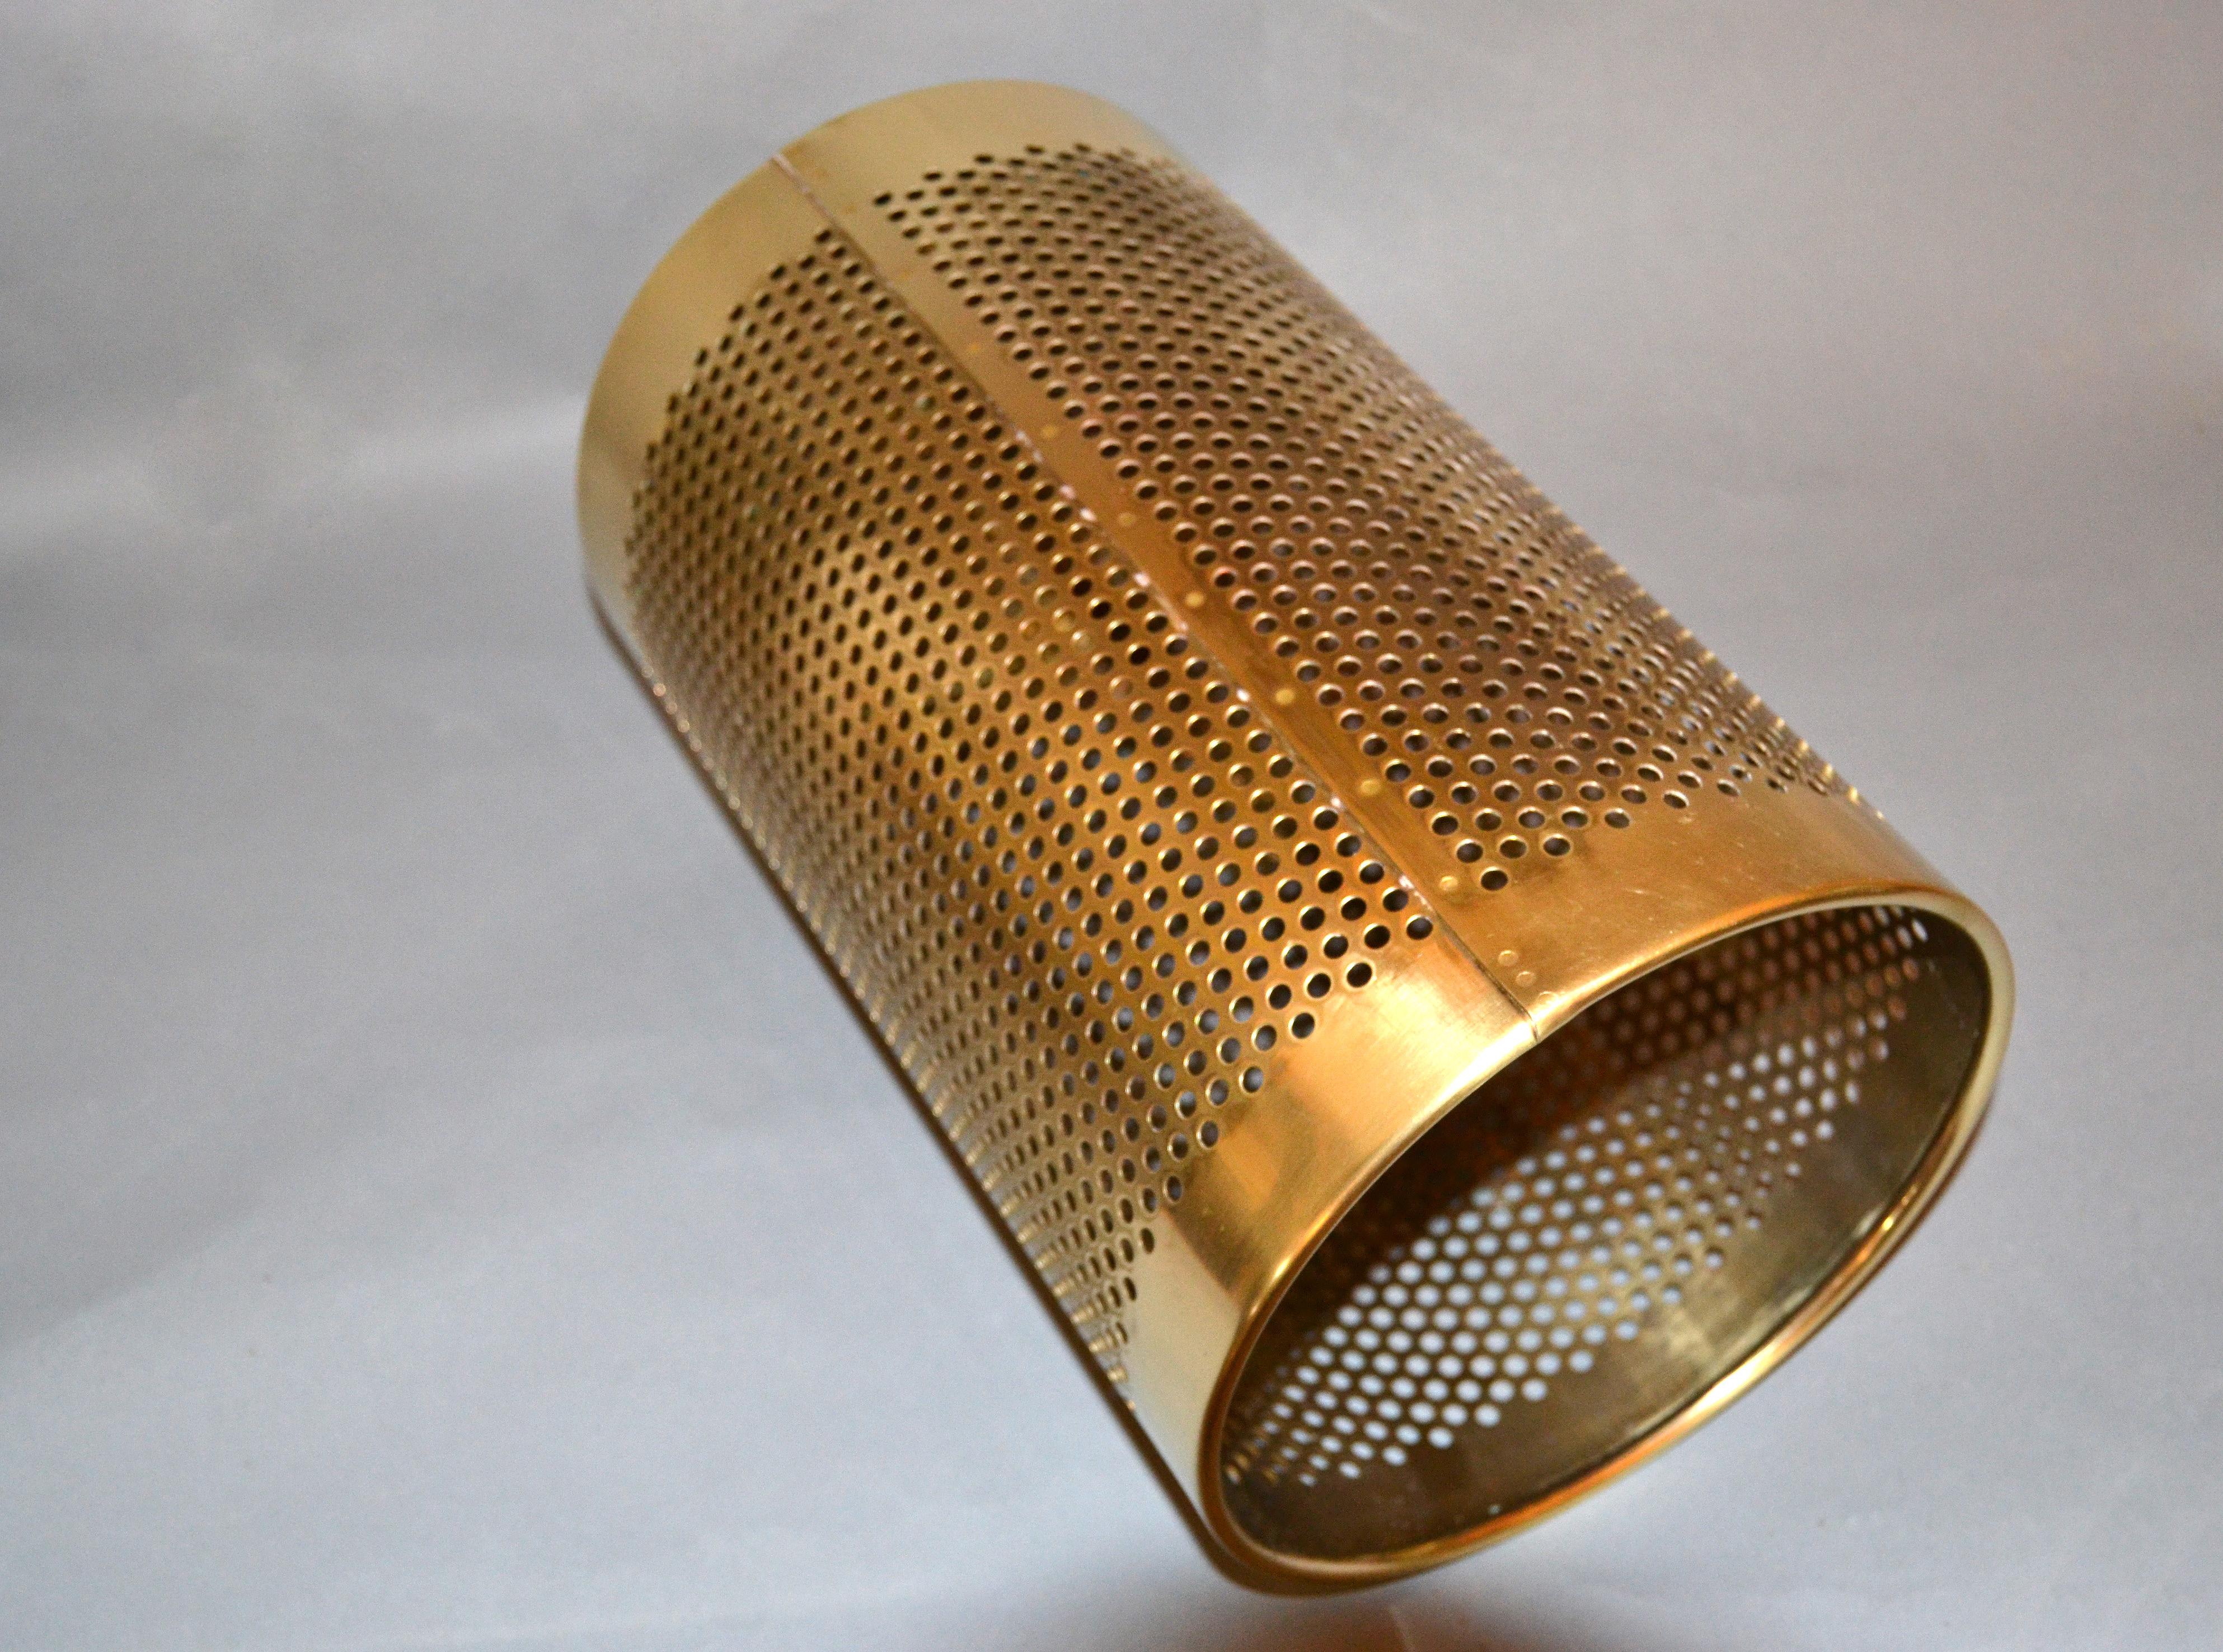 Vintage Frontgate Brass Italian Perforated Trash Waste Basket, Waste Can Italy 2